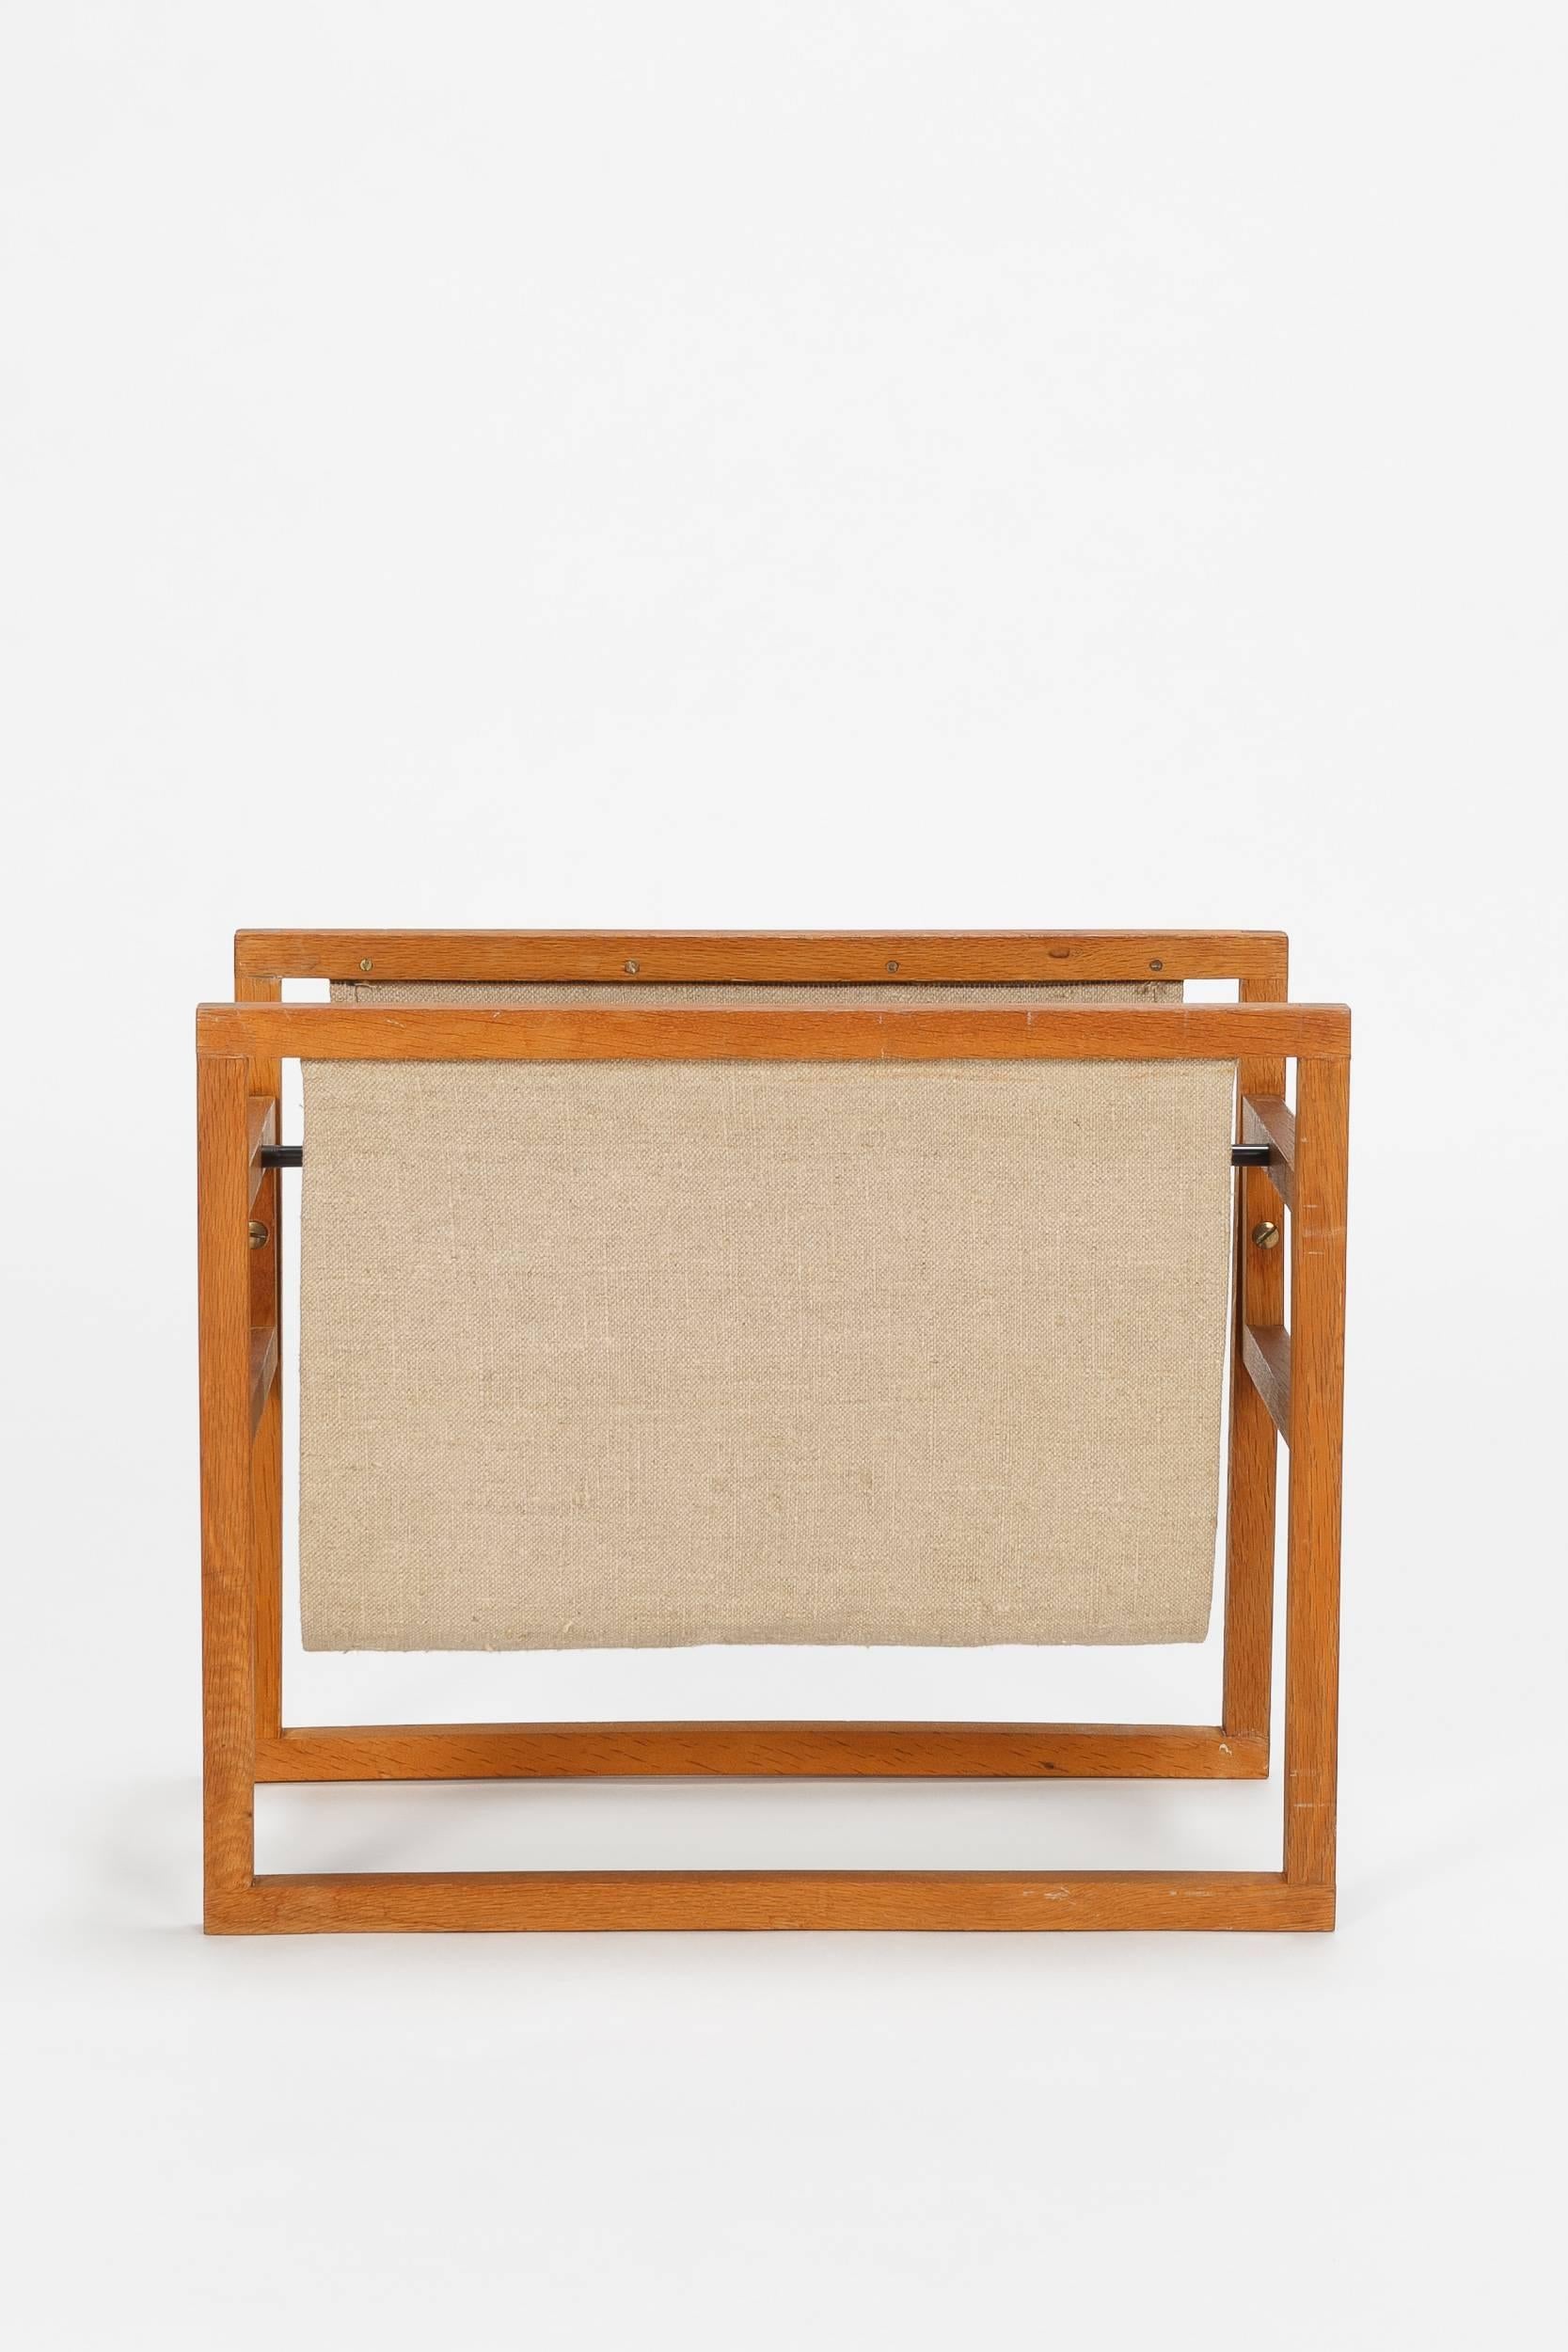 Wonderful Henning Wind-Hansen magazine rack manufactured by Sika Møbler in the 1960’s in Denmark. Solid oak with a storage for magazines and news made of linen. Nicely hand crafted.